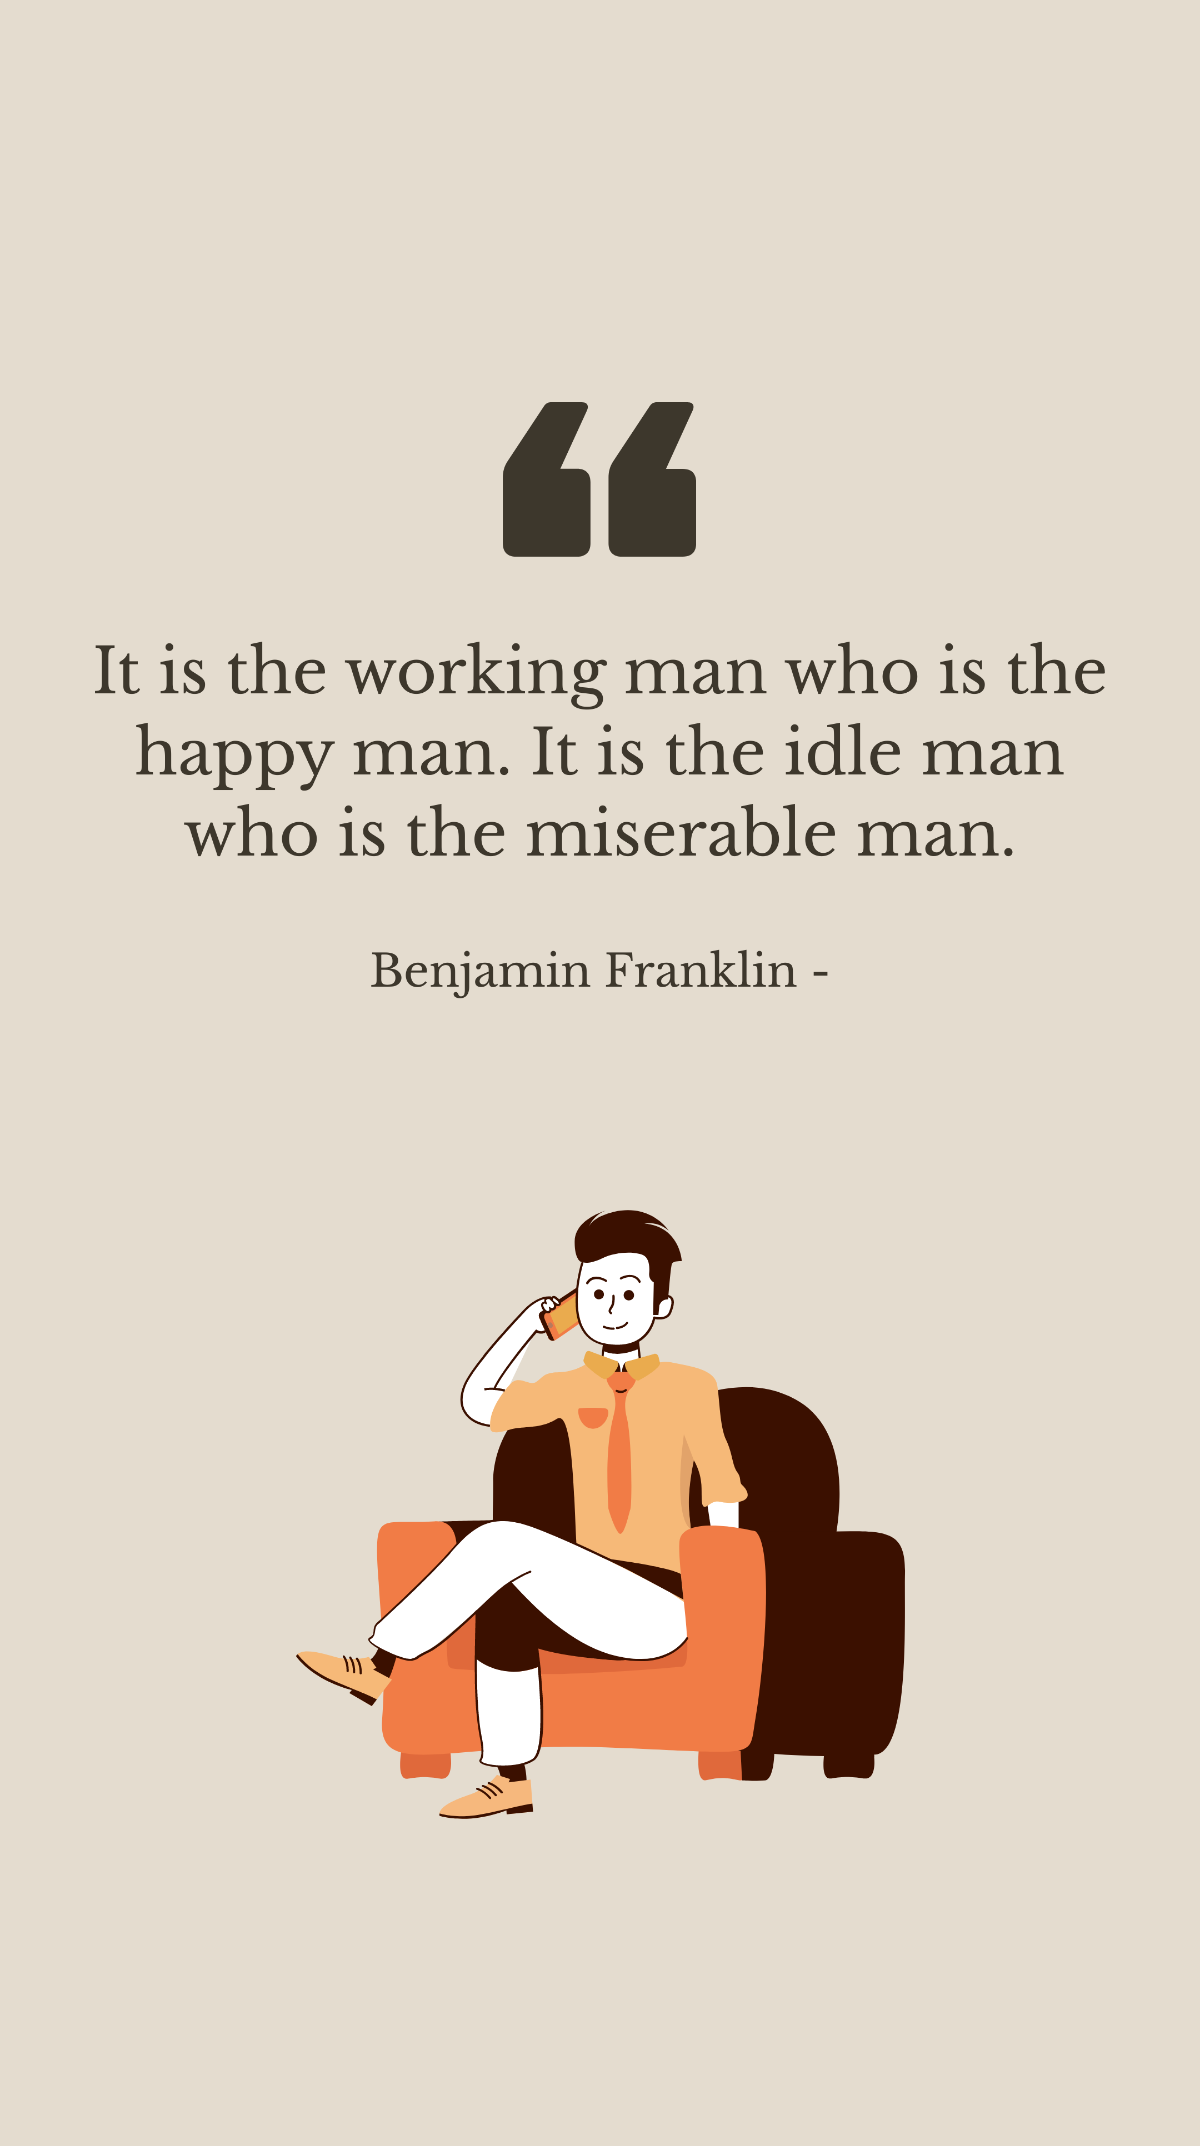 Free Benjamin Franklin - It is the working man who is the happy man. It is the idle man who is the miserable man. Template